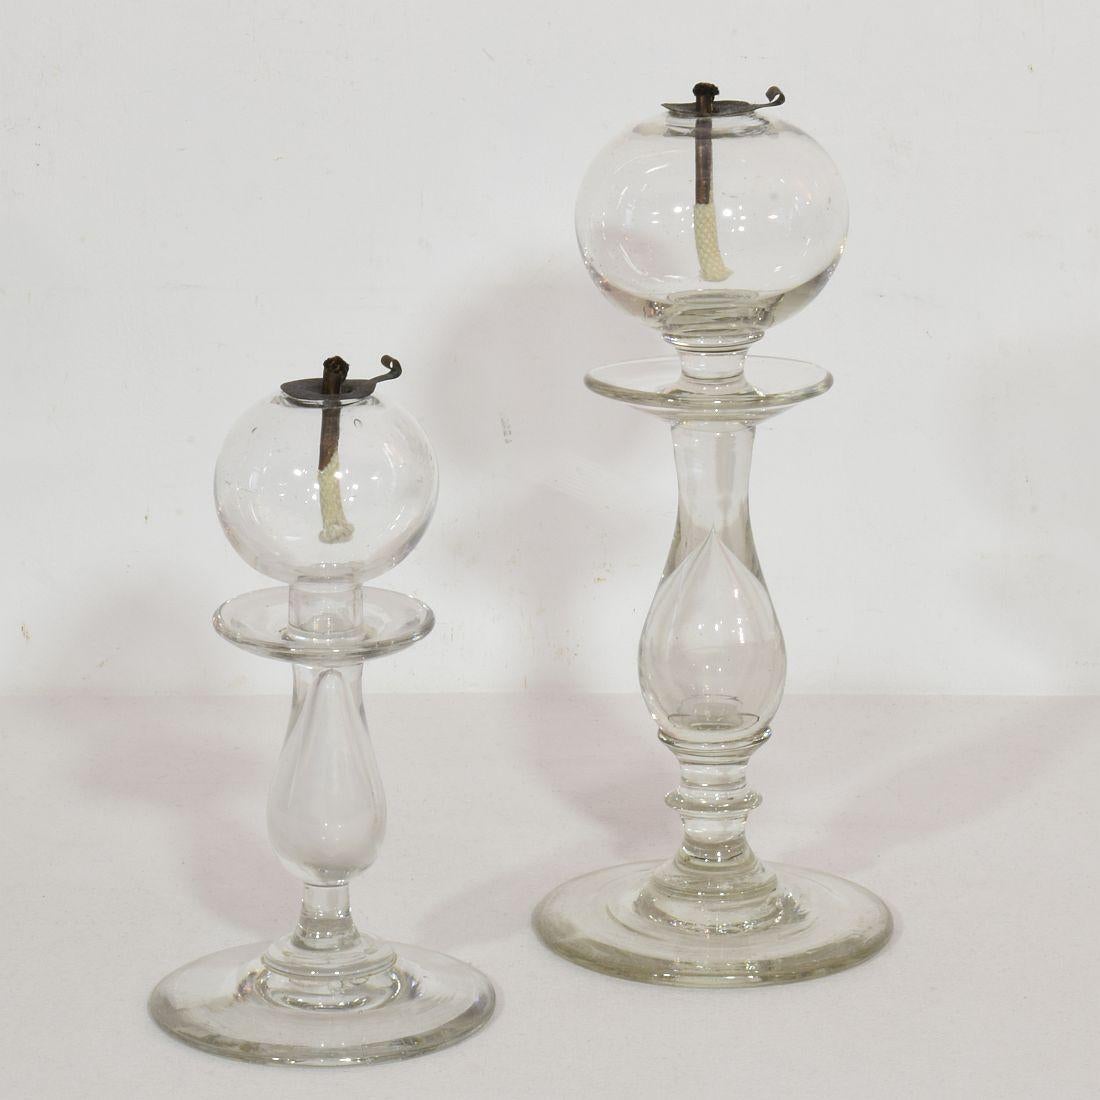 Rare collection of three hand blown glass weaver oil lamps from the South of France, France, circa 1800-1900
Very good condition. Copper wick holders of recent date.
Measures: H:14-25cm W:7-10,5cm D:7-10,5cm each.
Measurement here below is of the